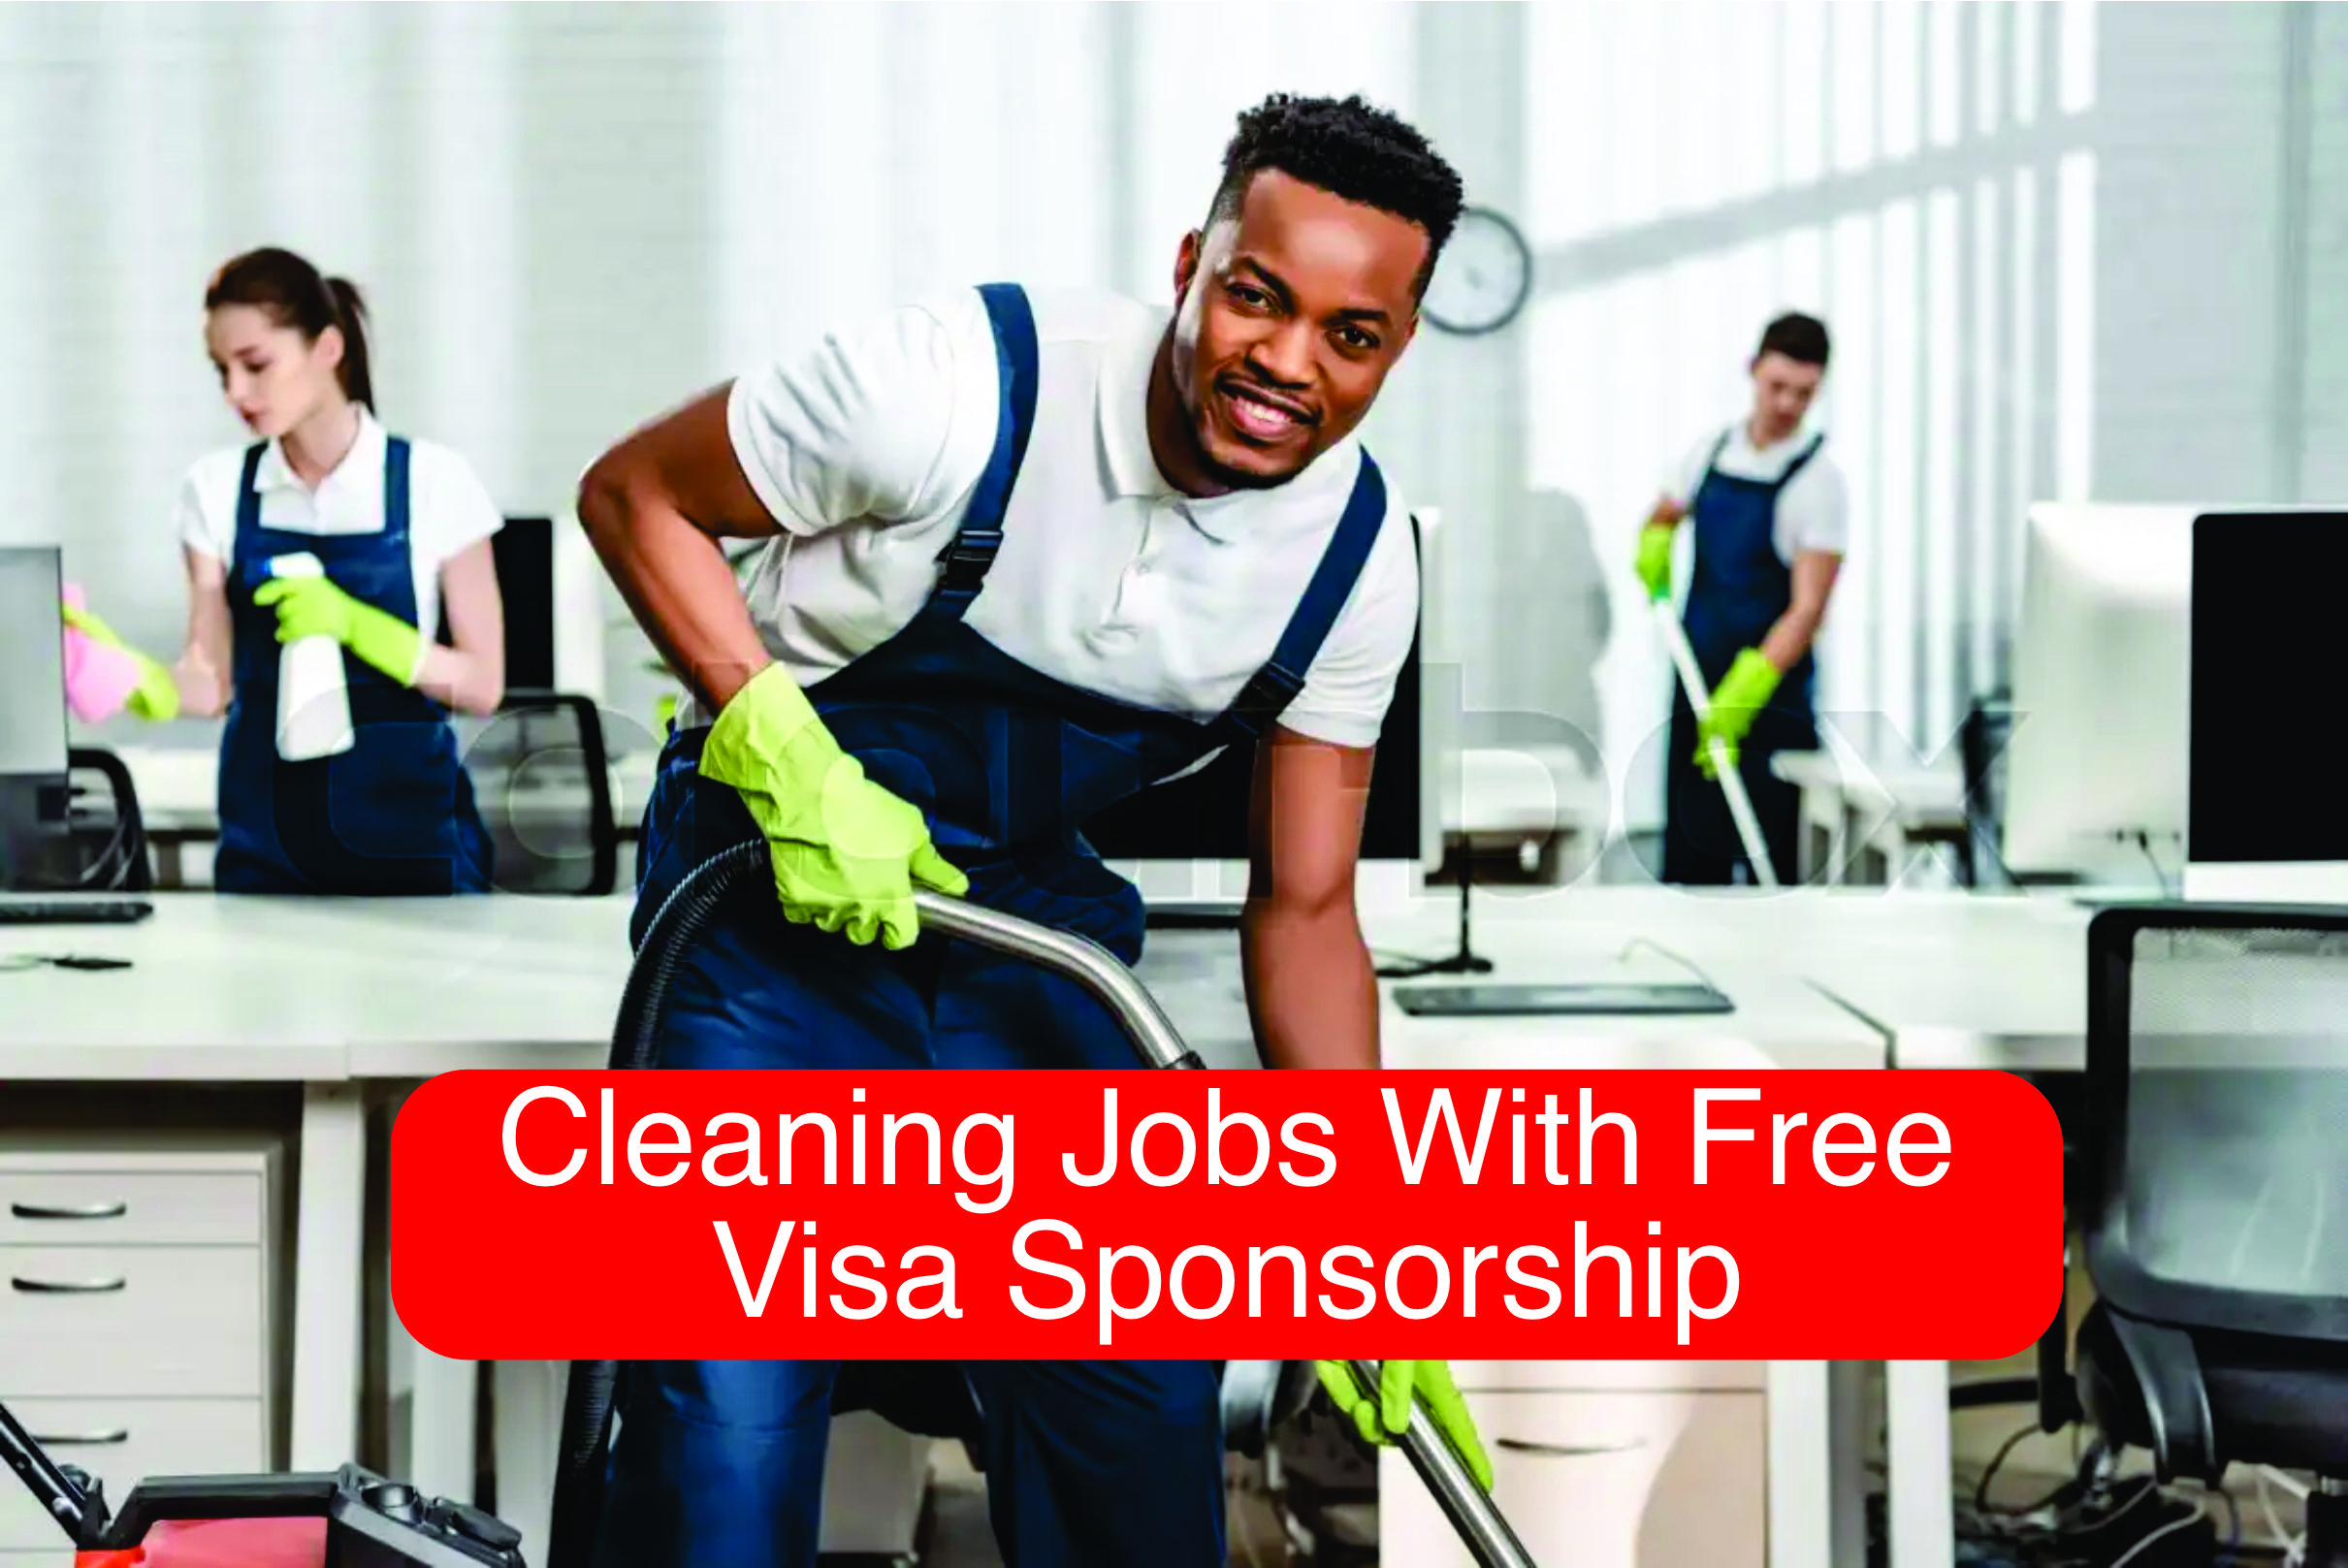 Cleaning Jobs With Free Visa Sponsorship